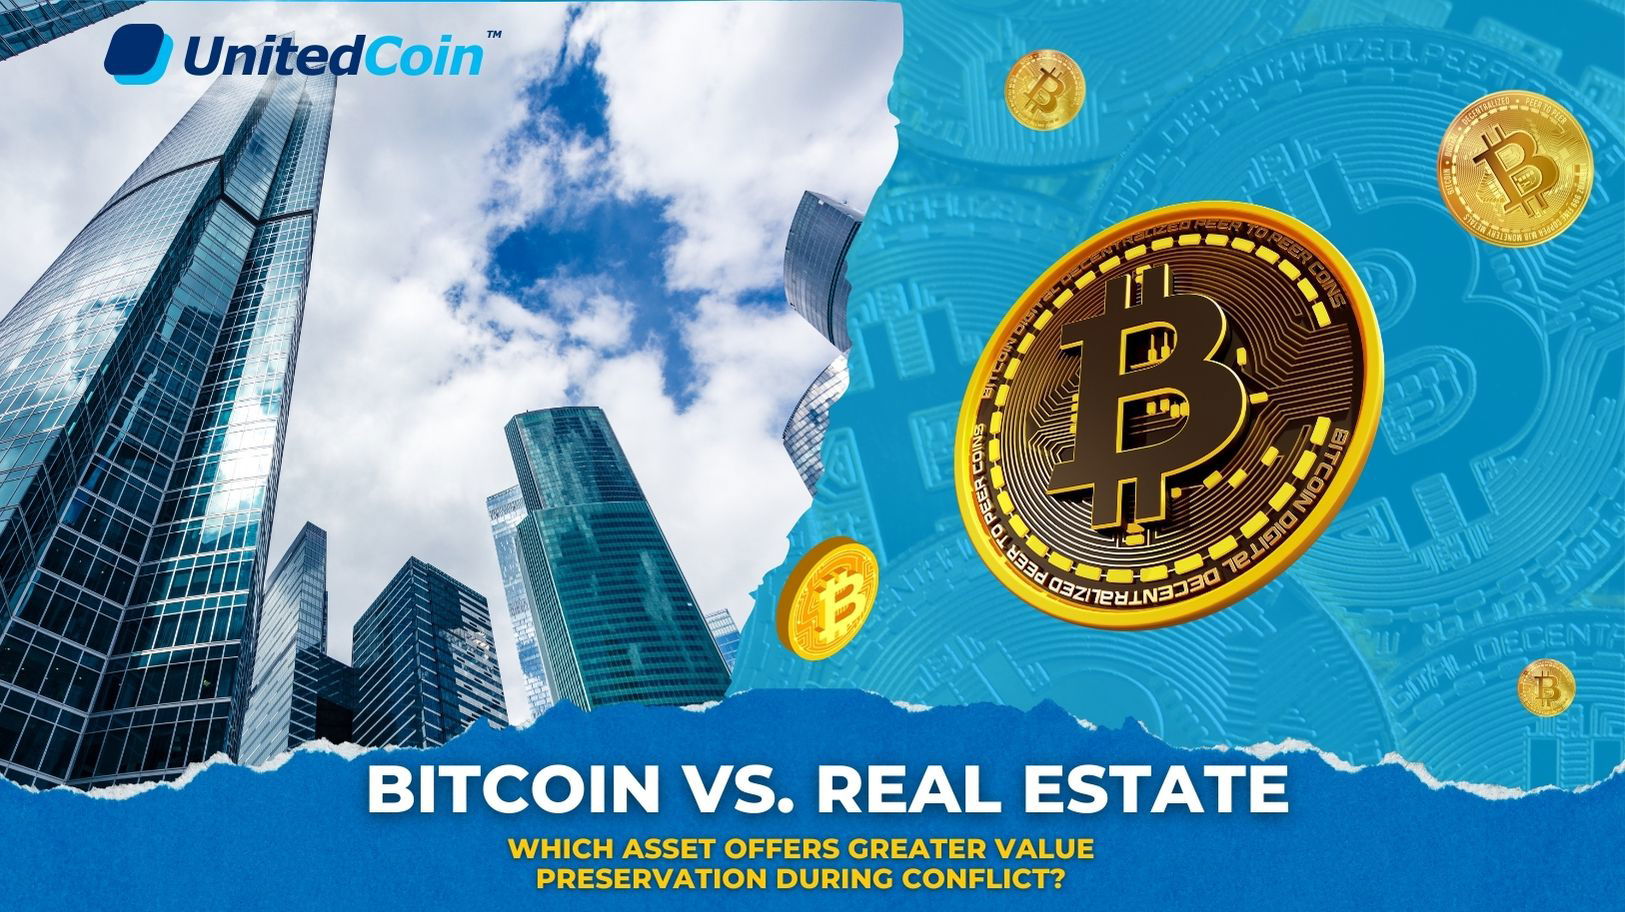 Bitcoin vs. Real Estate: Which Asset Offers Greater Value Preservation During Conflict?